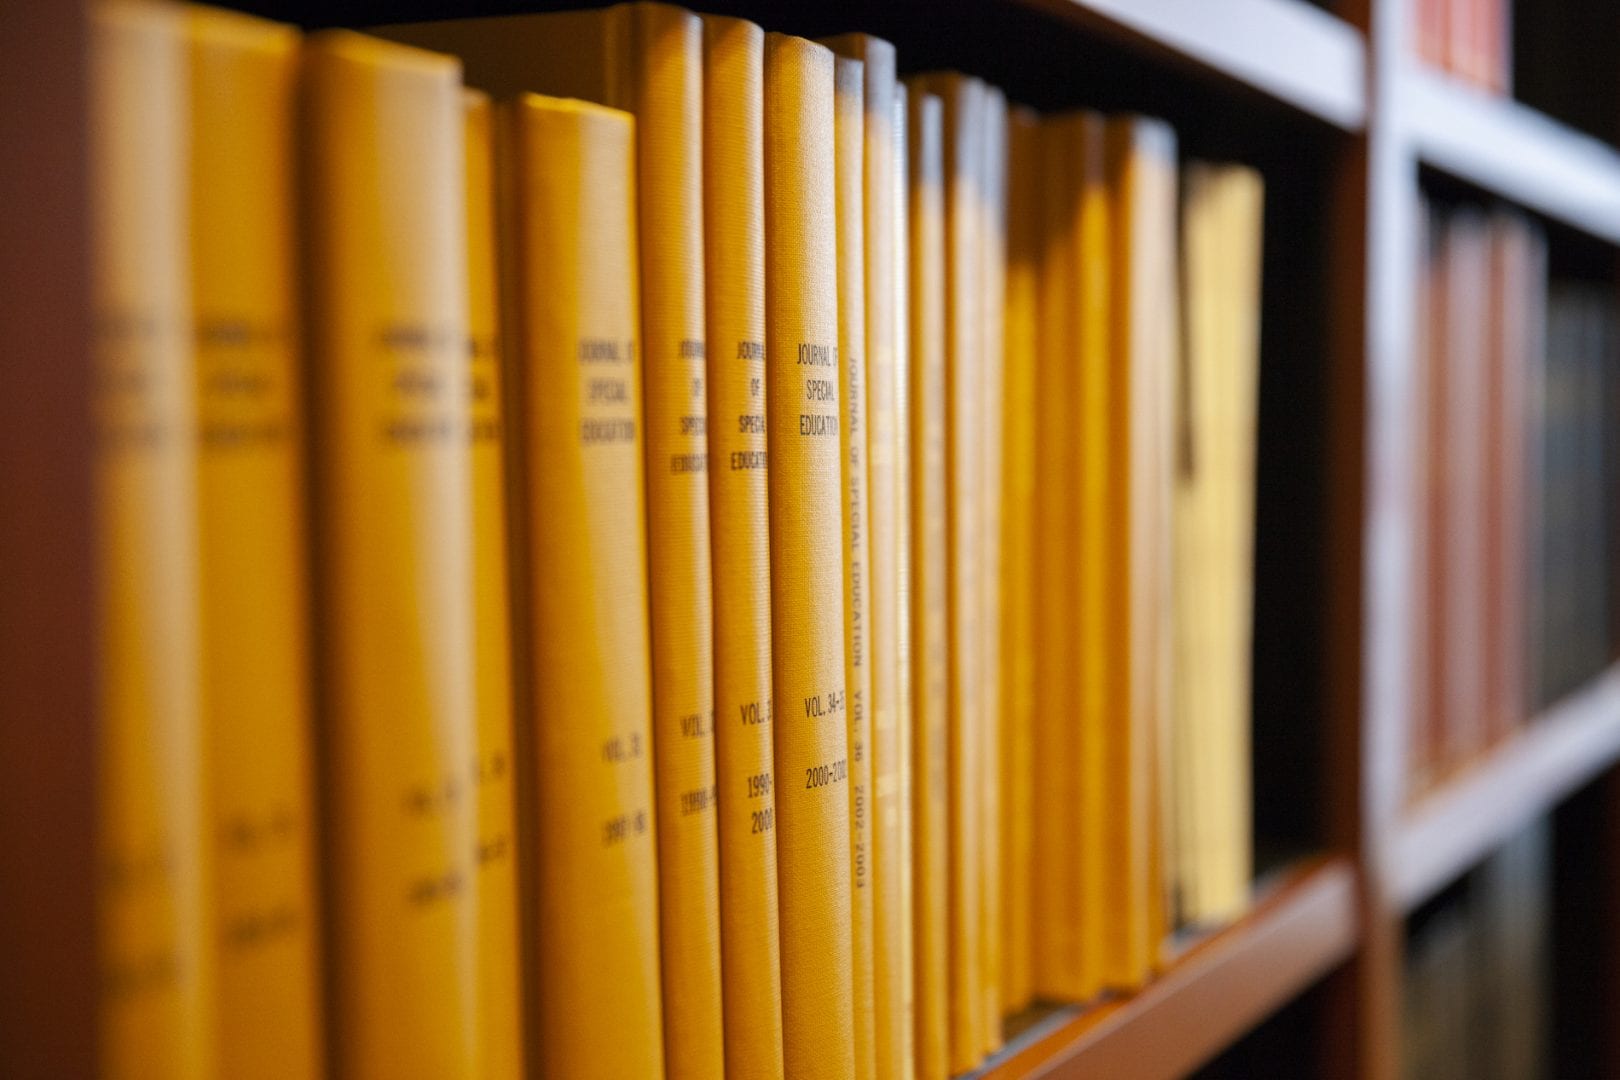 Volumes of books on a shelf at a library